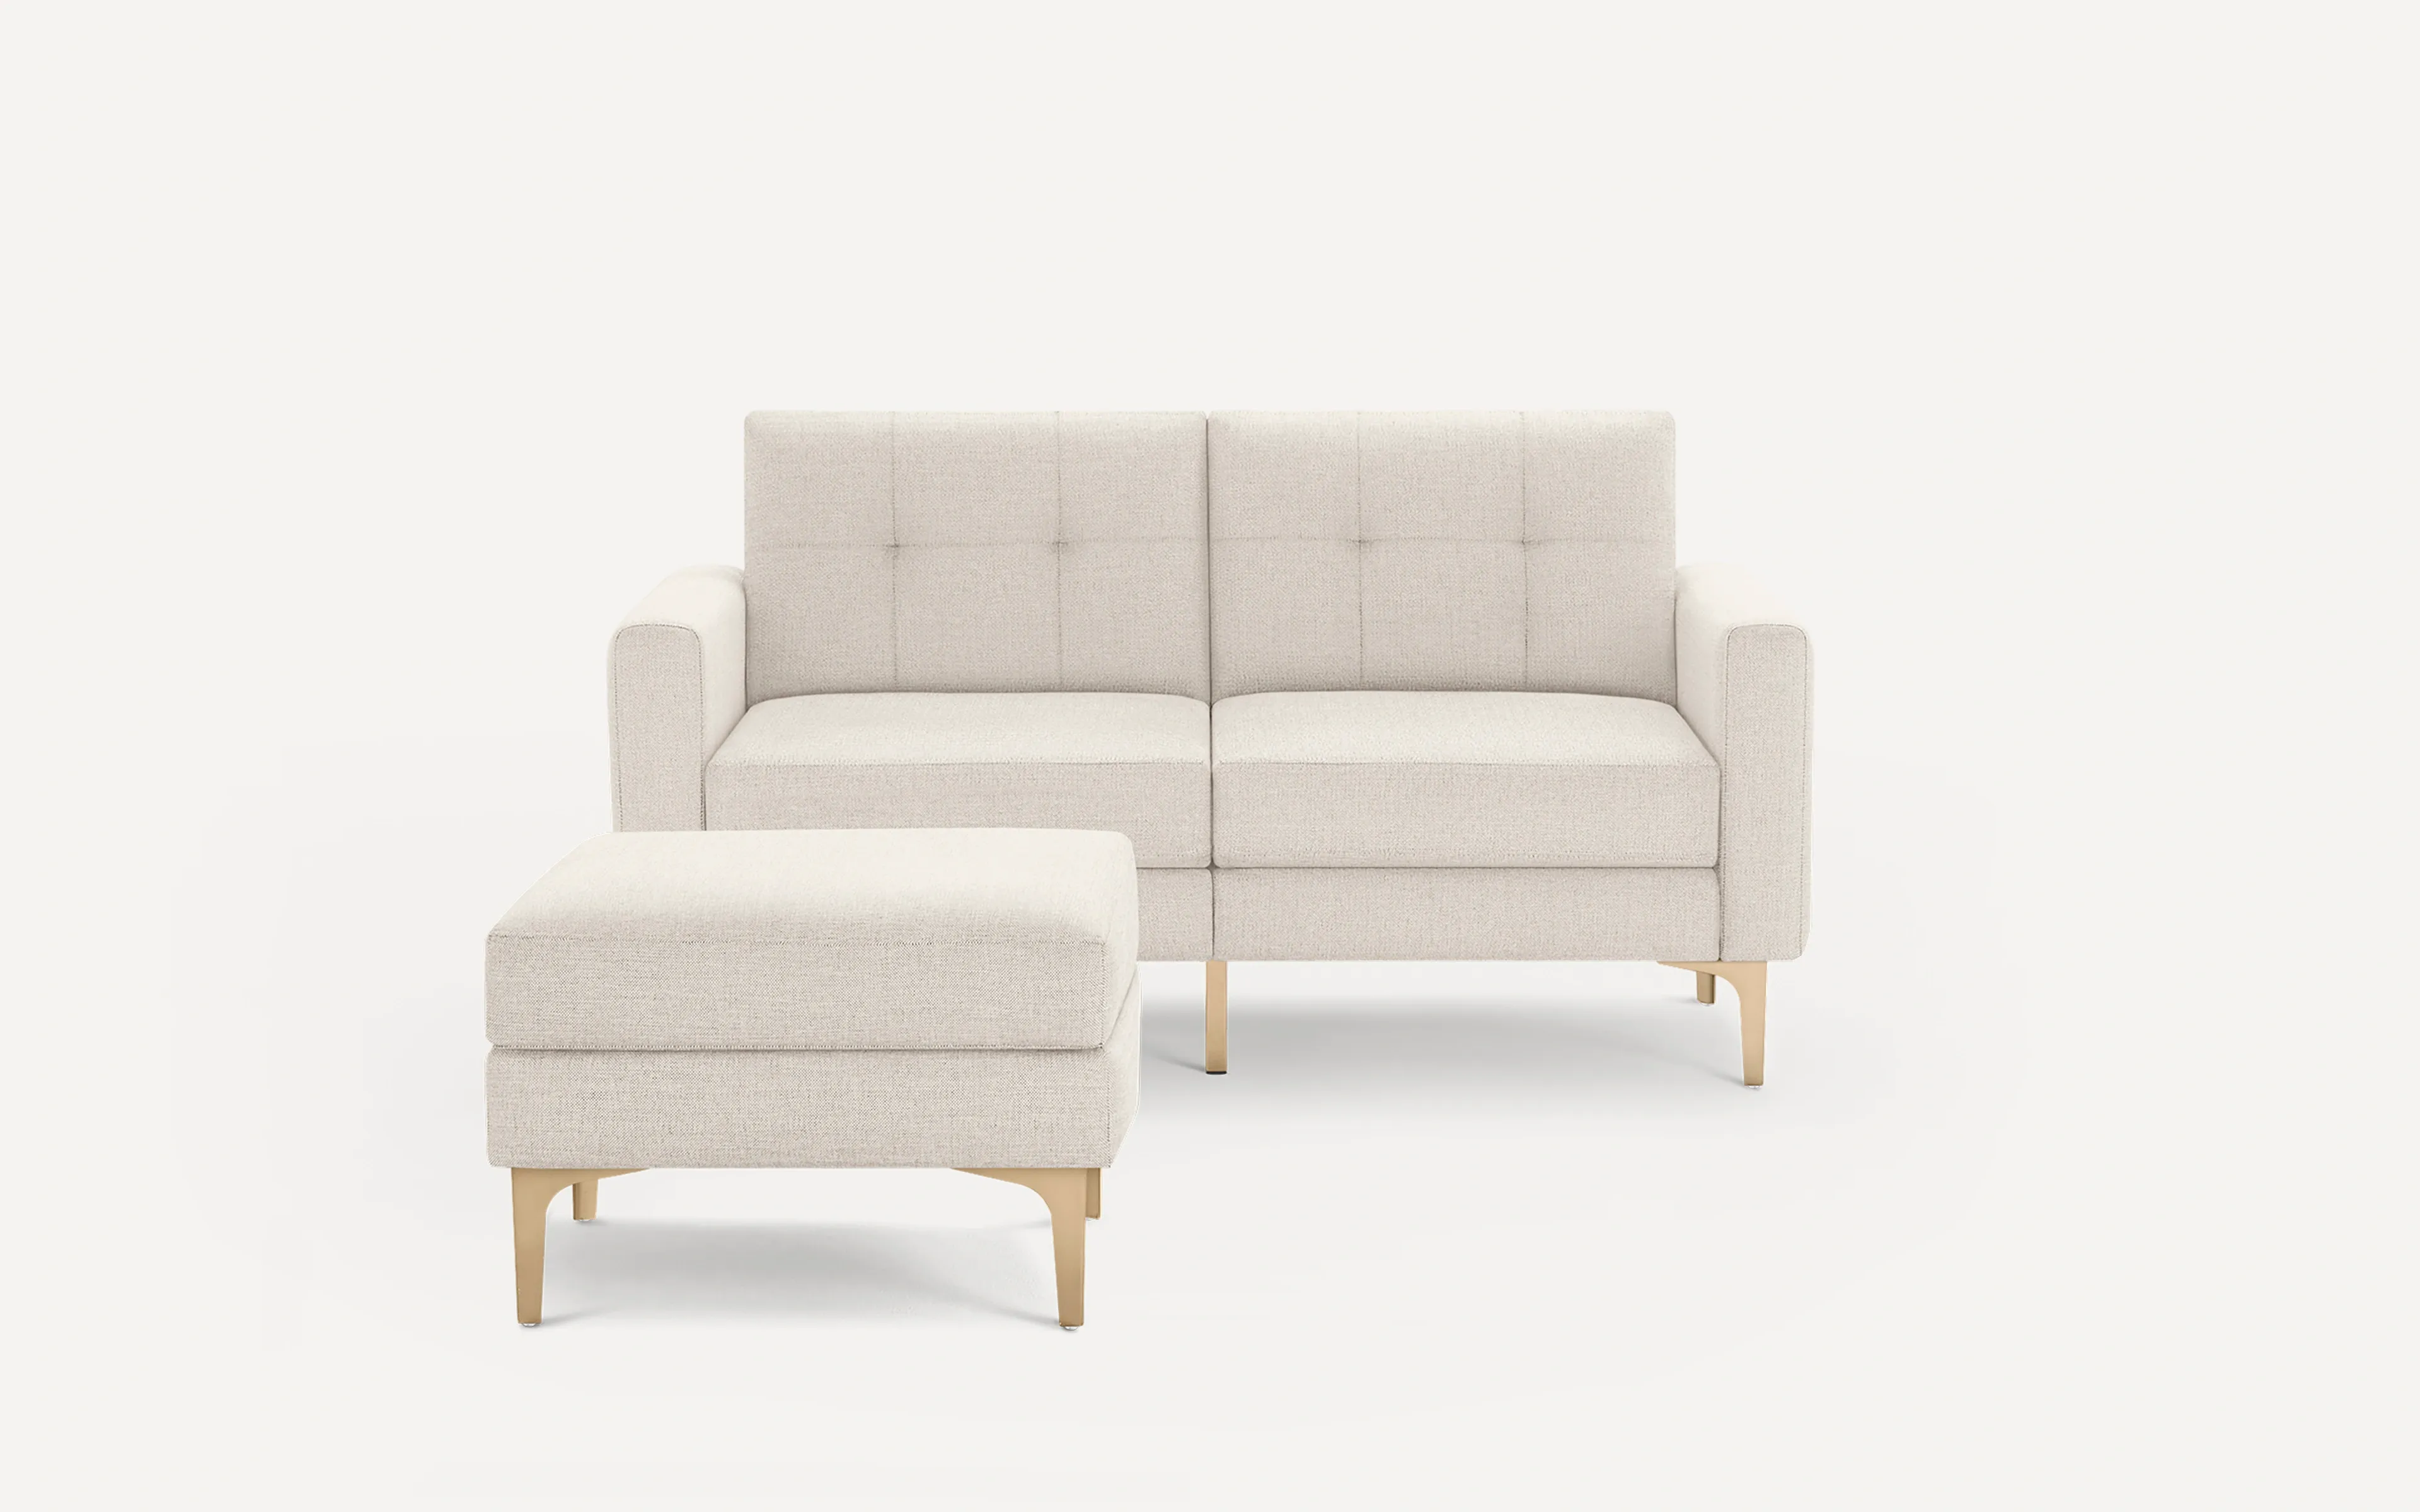 Original Nomad Loveseat with Ottoman in Ivory Fabric